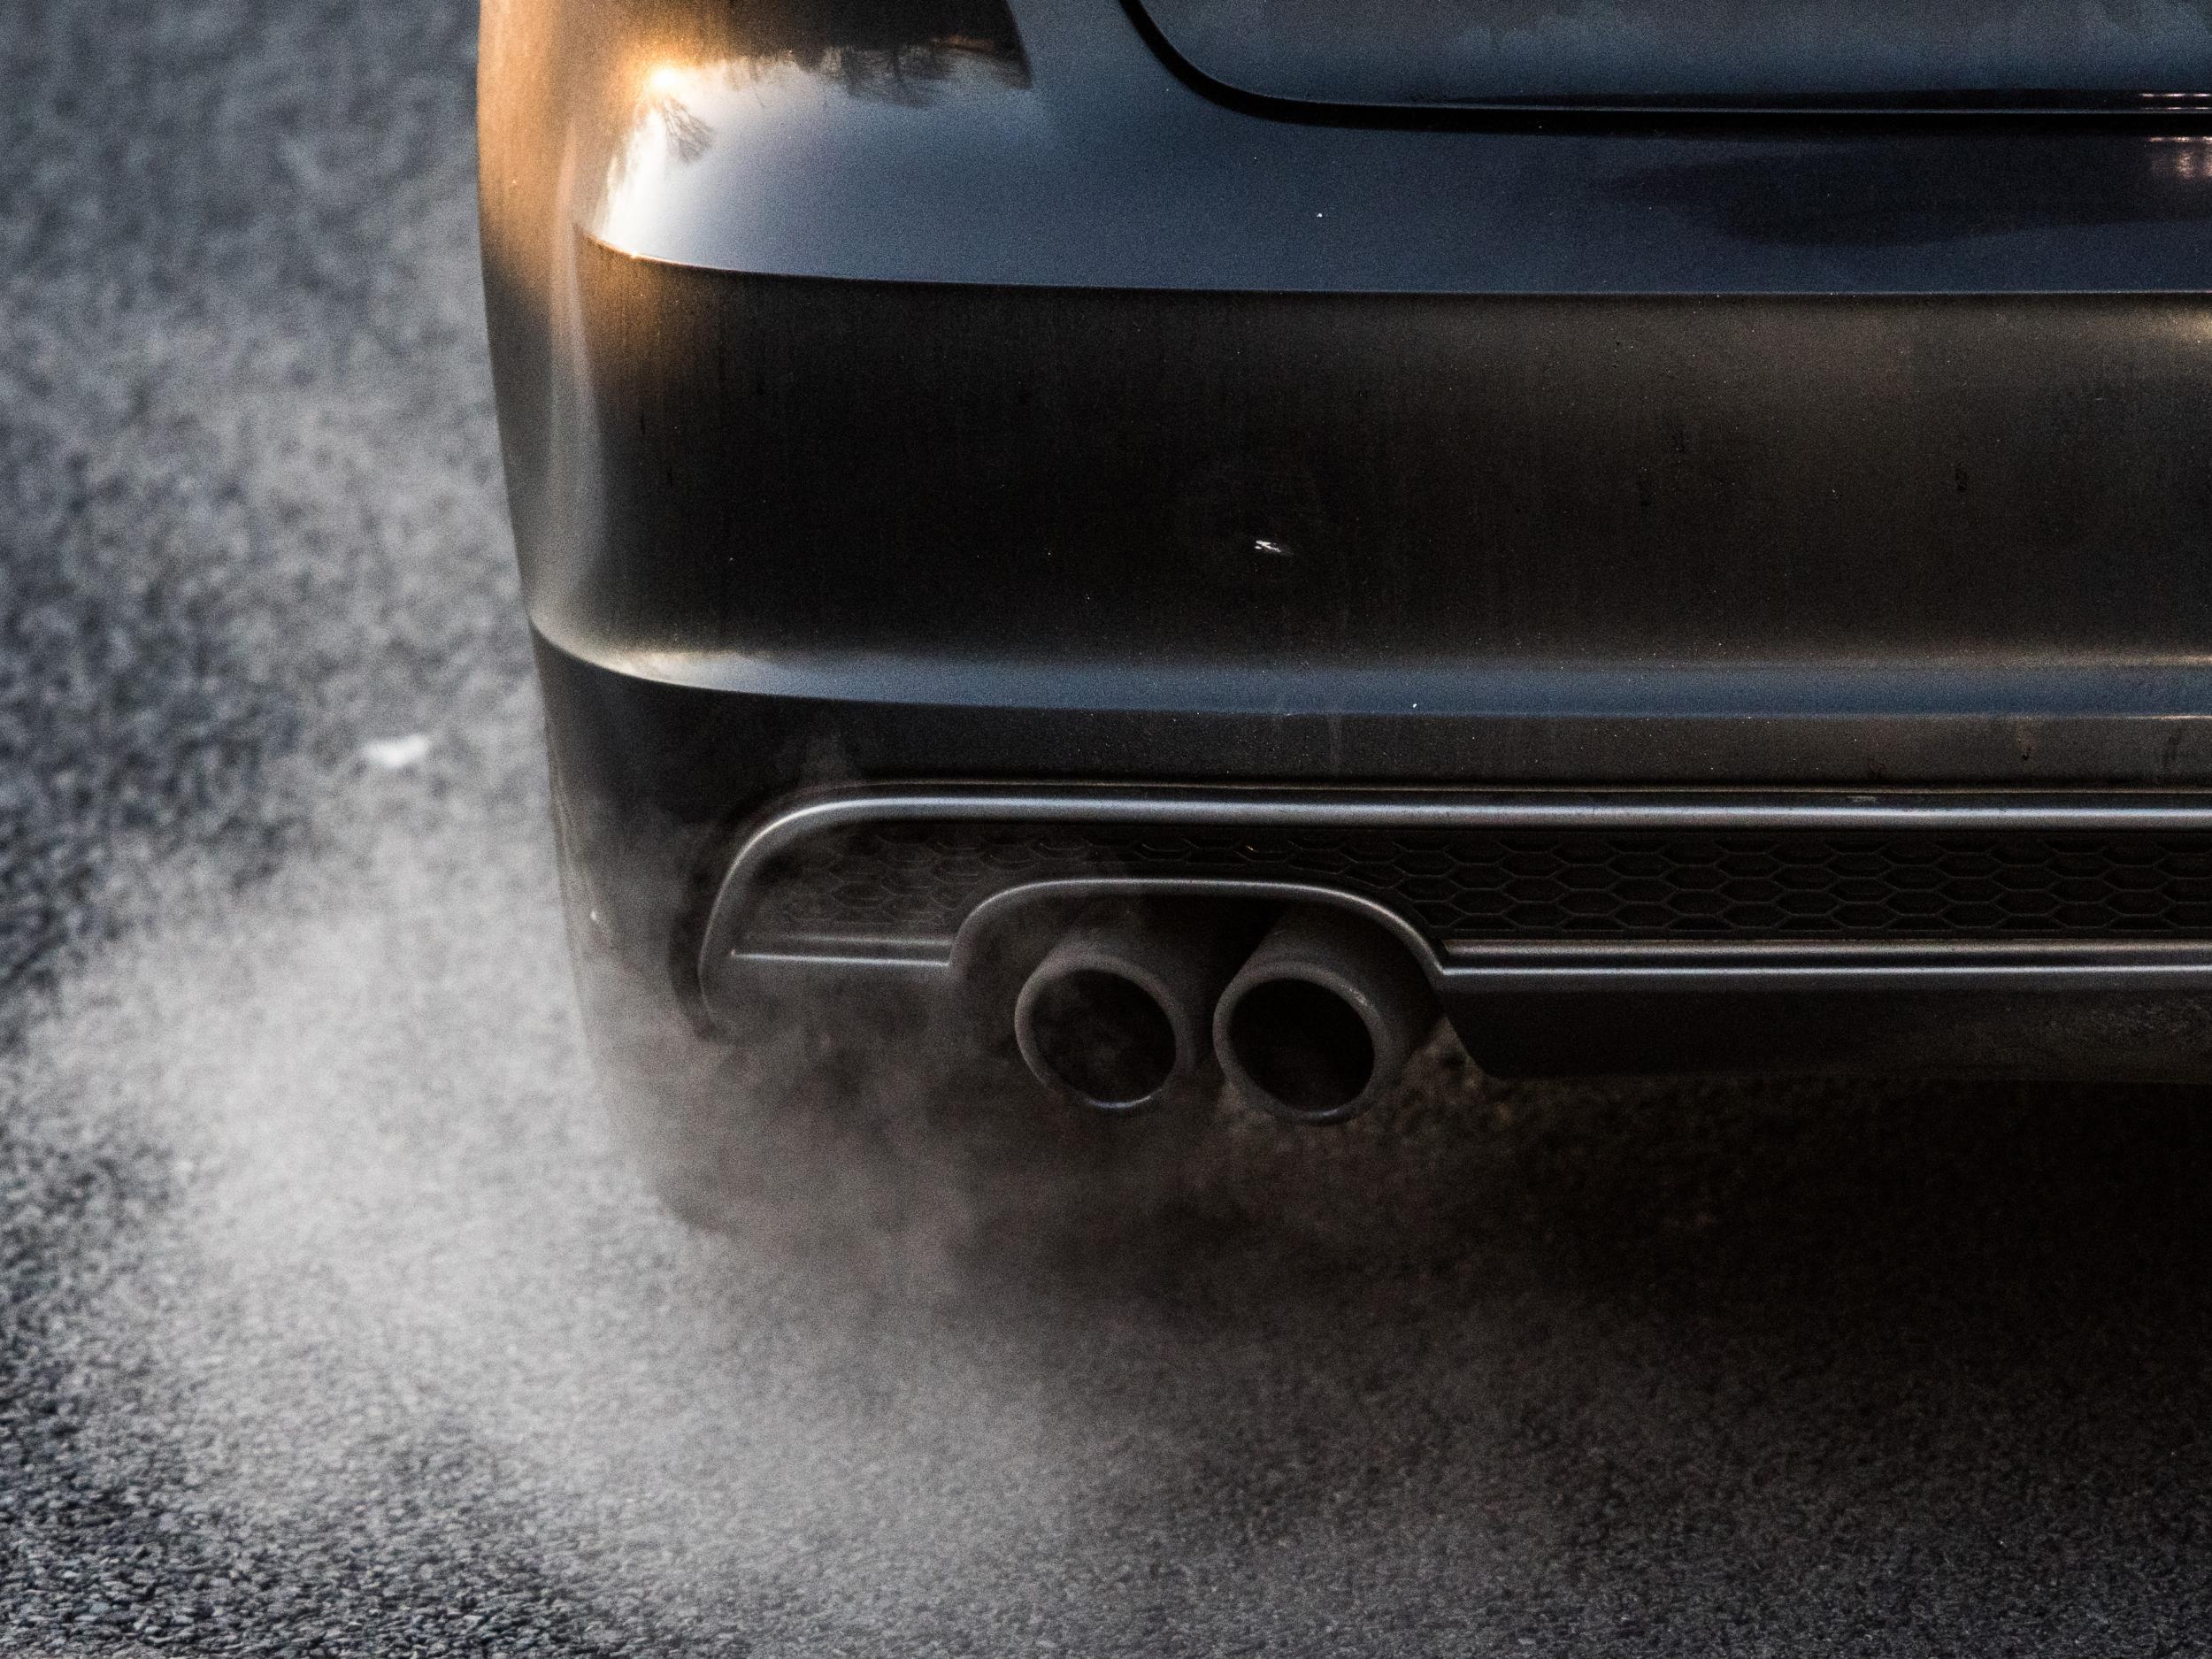 Many of the newest models of diesel cars for sale in Europe emit nitrogen oxide above current legal limits